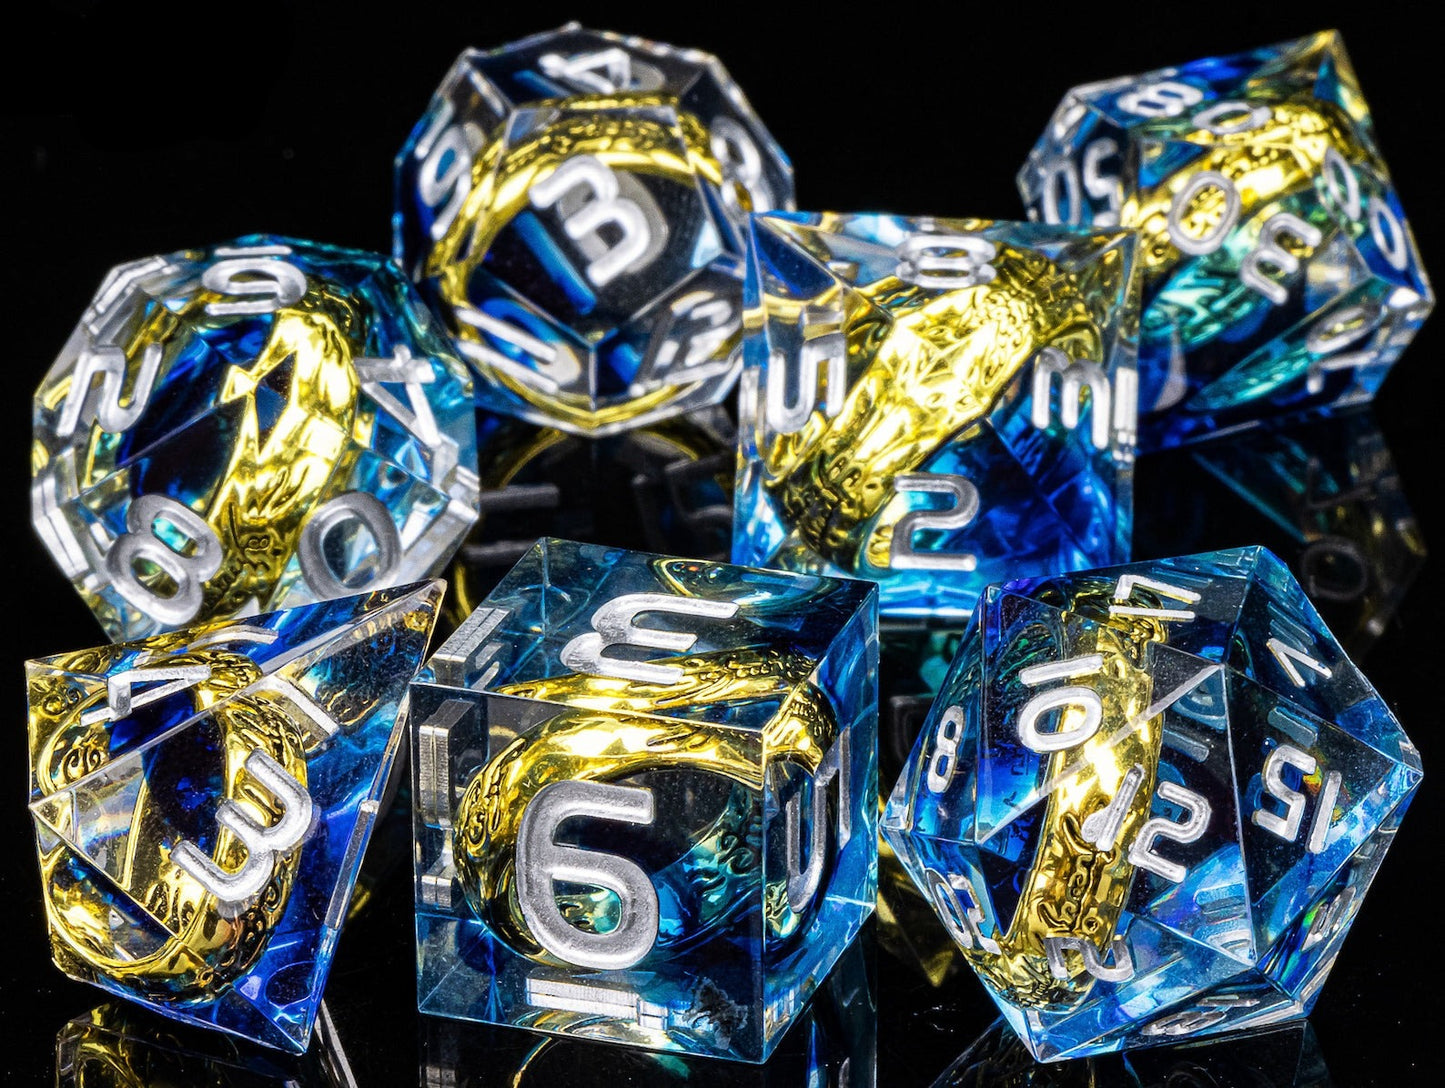 Handmade One Ring D&D Dice - The Rings Resin DND Blue Dice